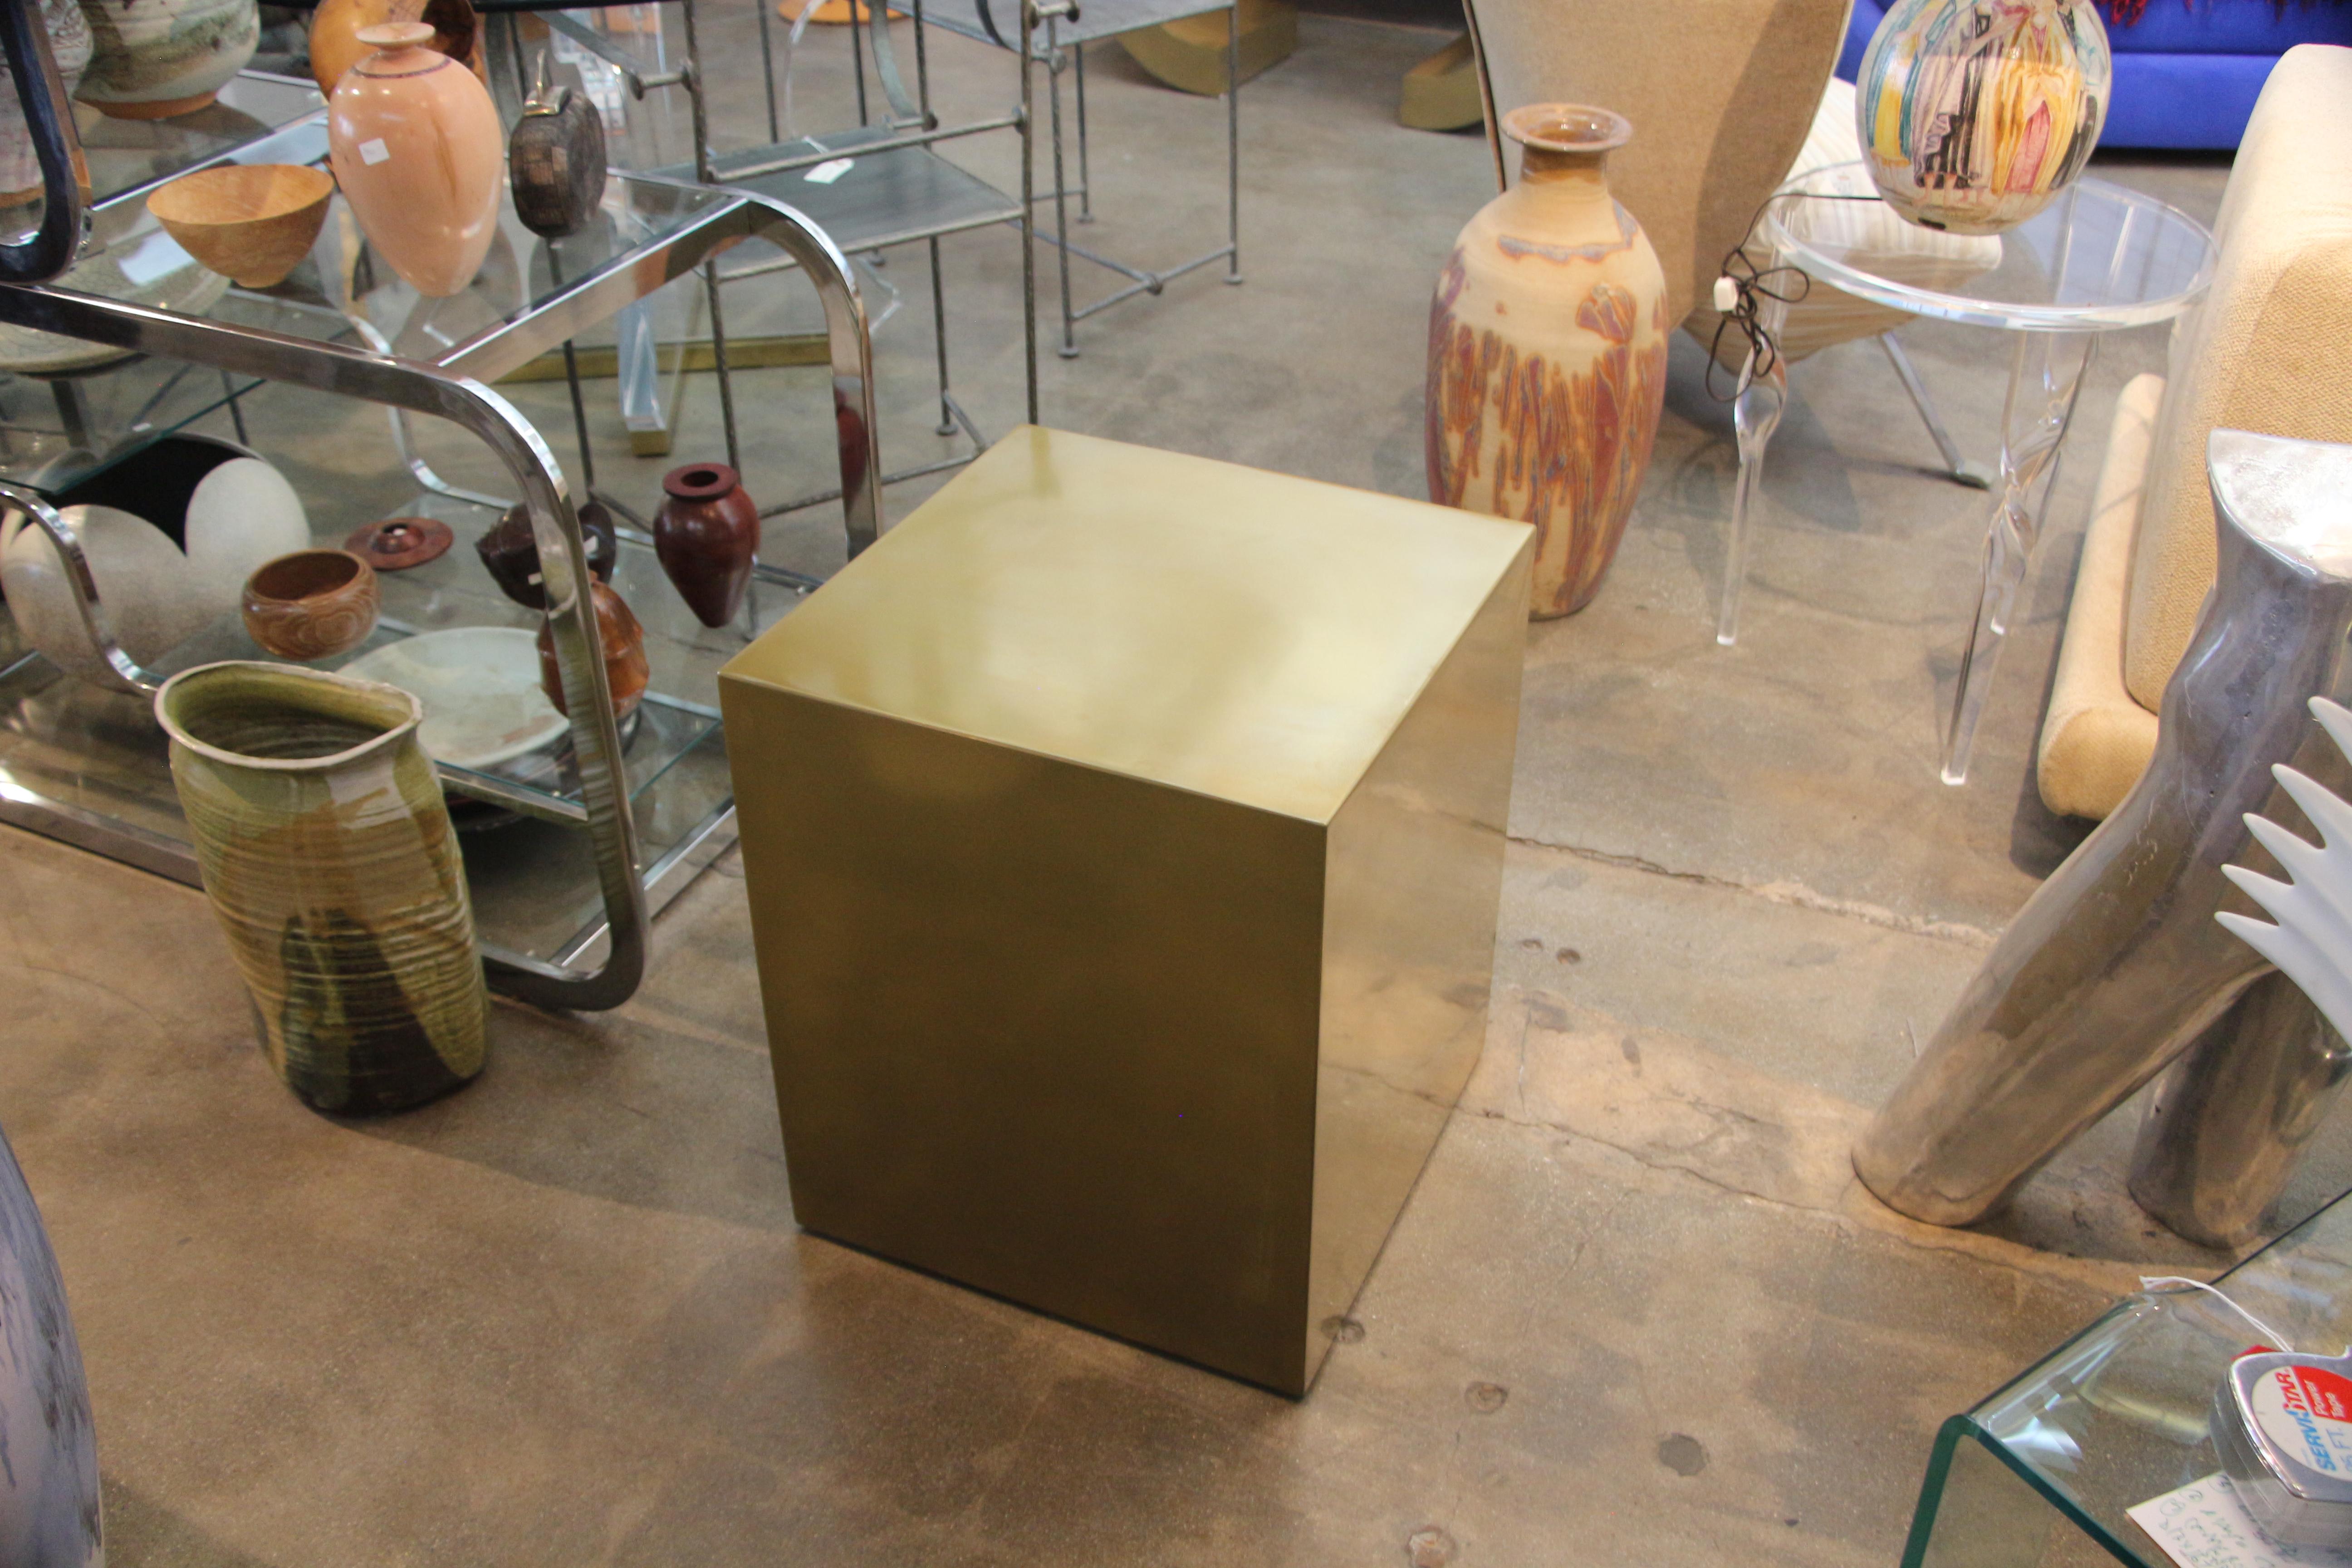 A bridges over time originals brass coated cube table designed by MarCo Antonio. It is a handmade prototype but can be ordered in any color and size. Some minor imperfections as it is a prototype and handmade.
A mate can be made to order.